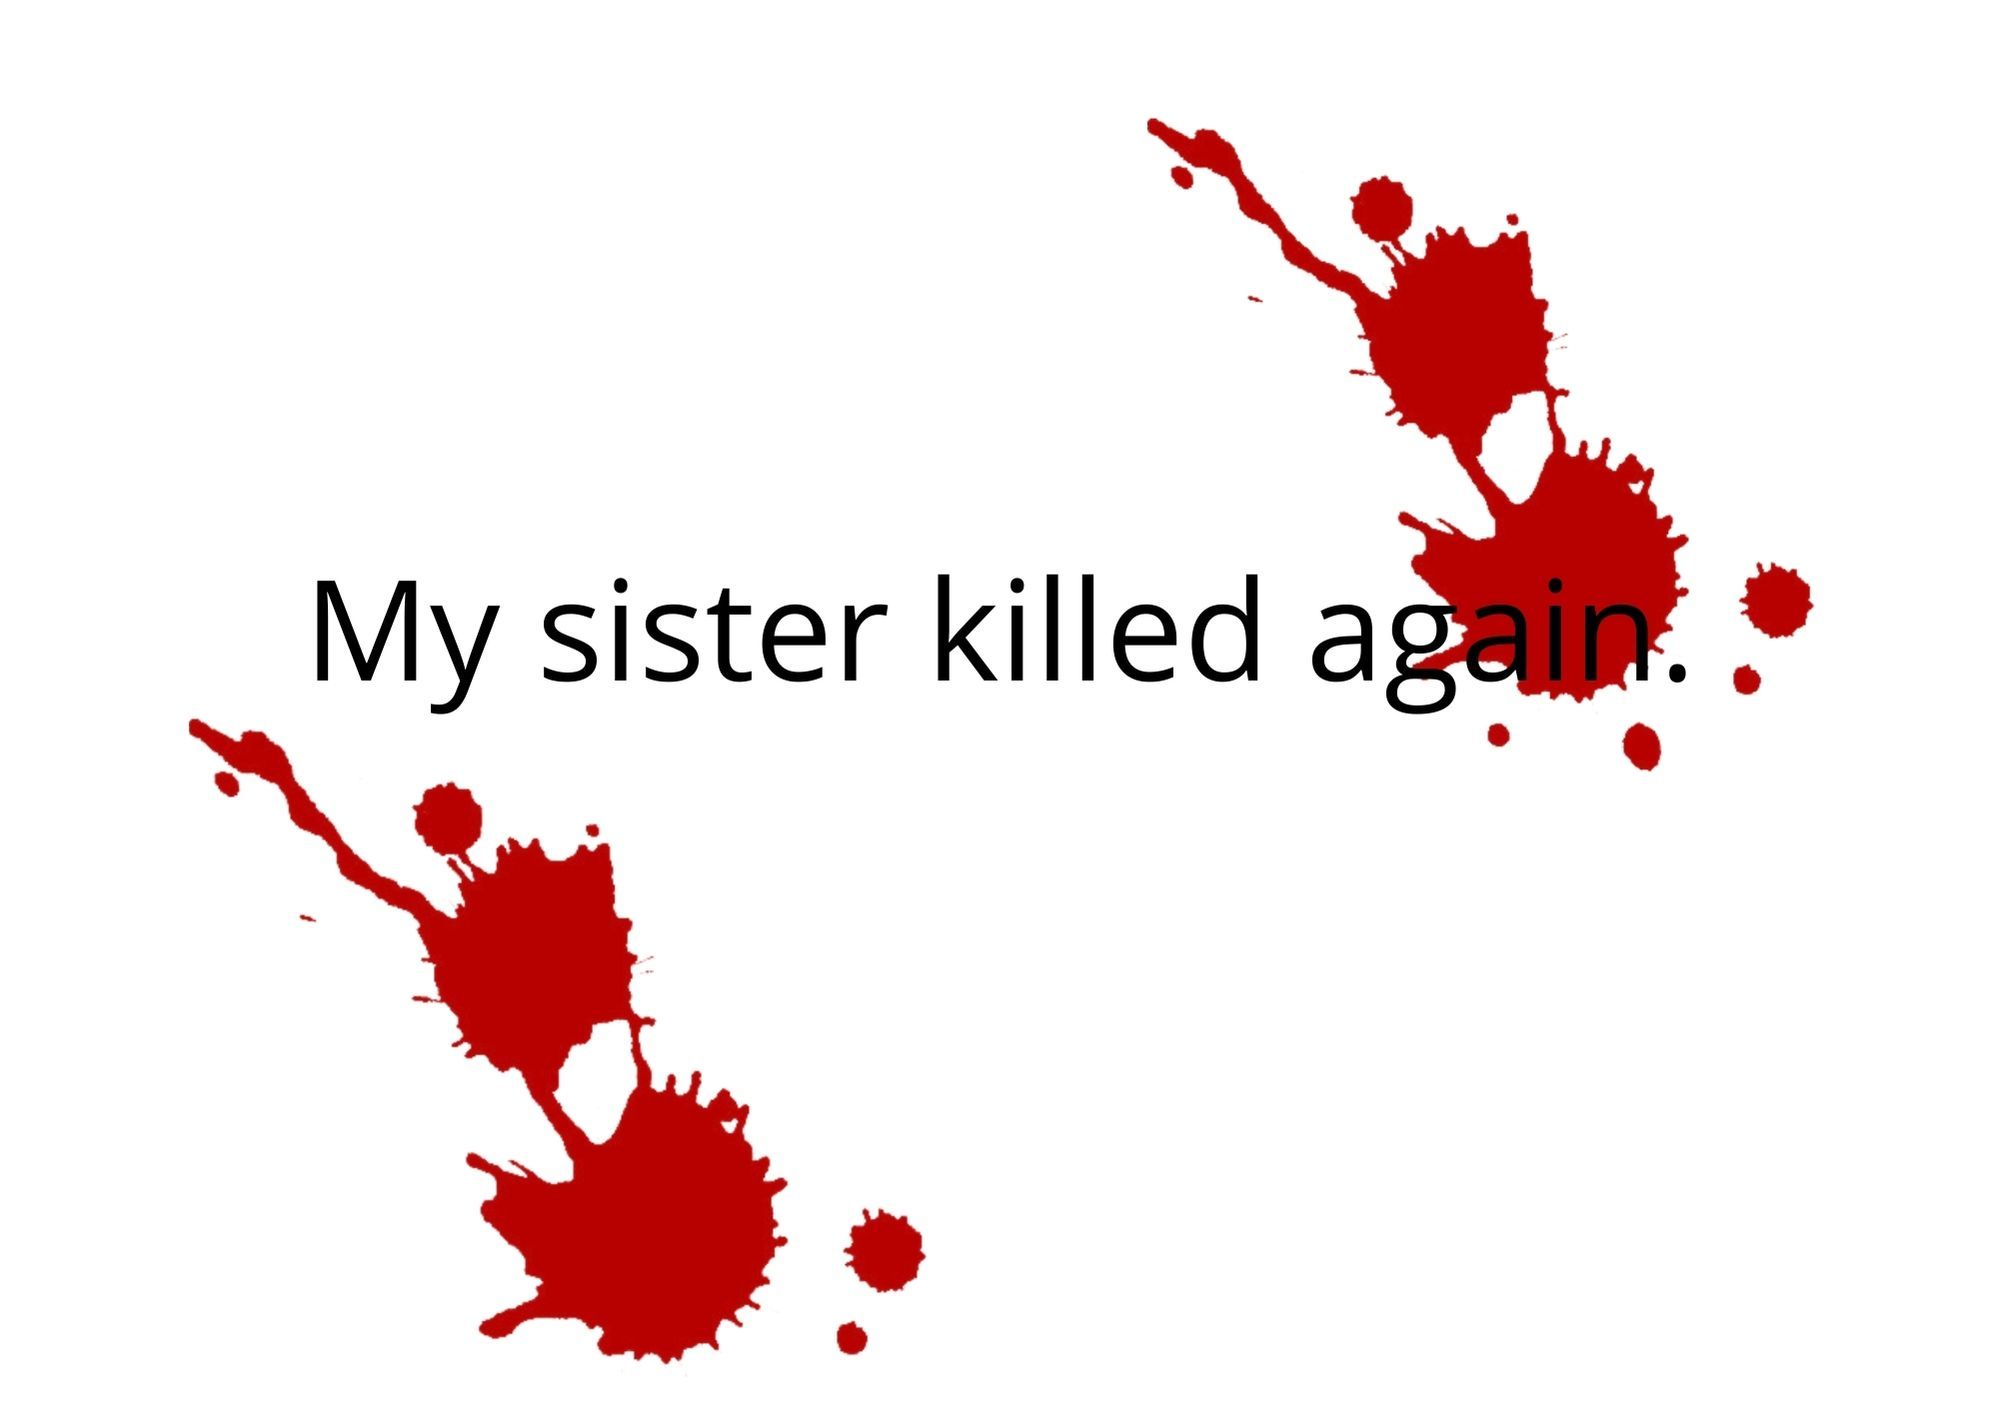 White background with blood splatter and the words "My sister killed again."